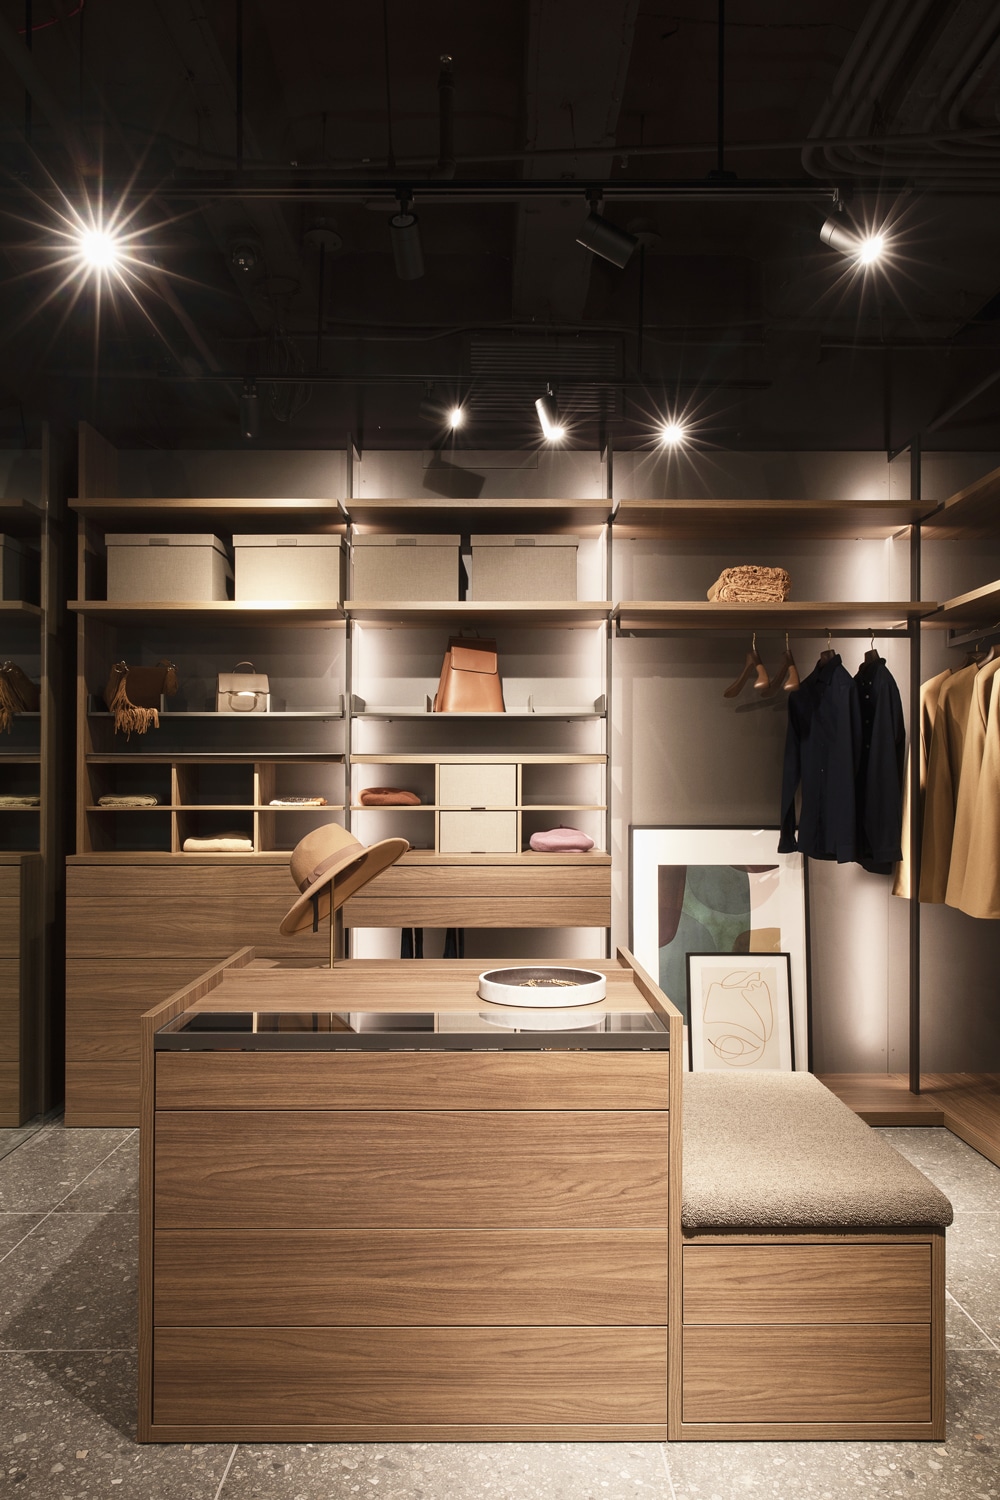 The Cabina walk-in closet island can include a bench, turning the space into a dressing room. The drawers of the bench module have an easy push-open system.